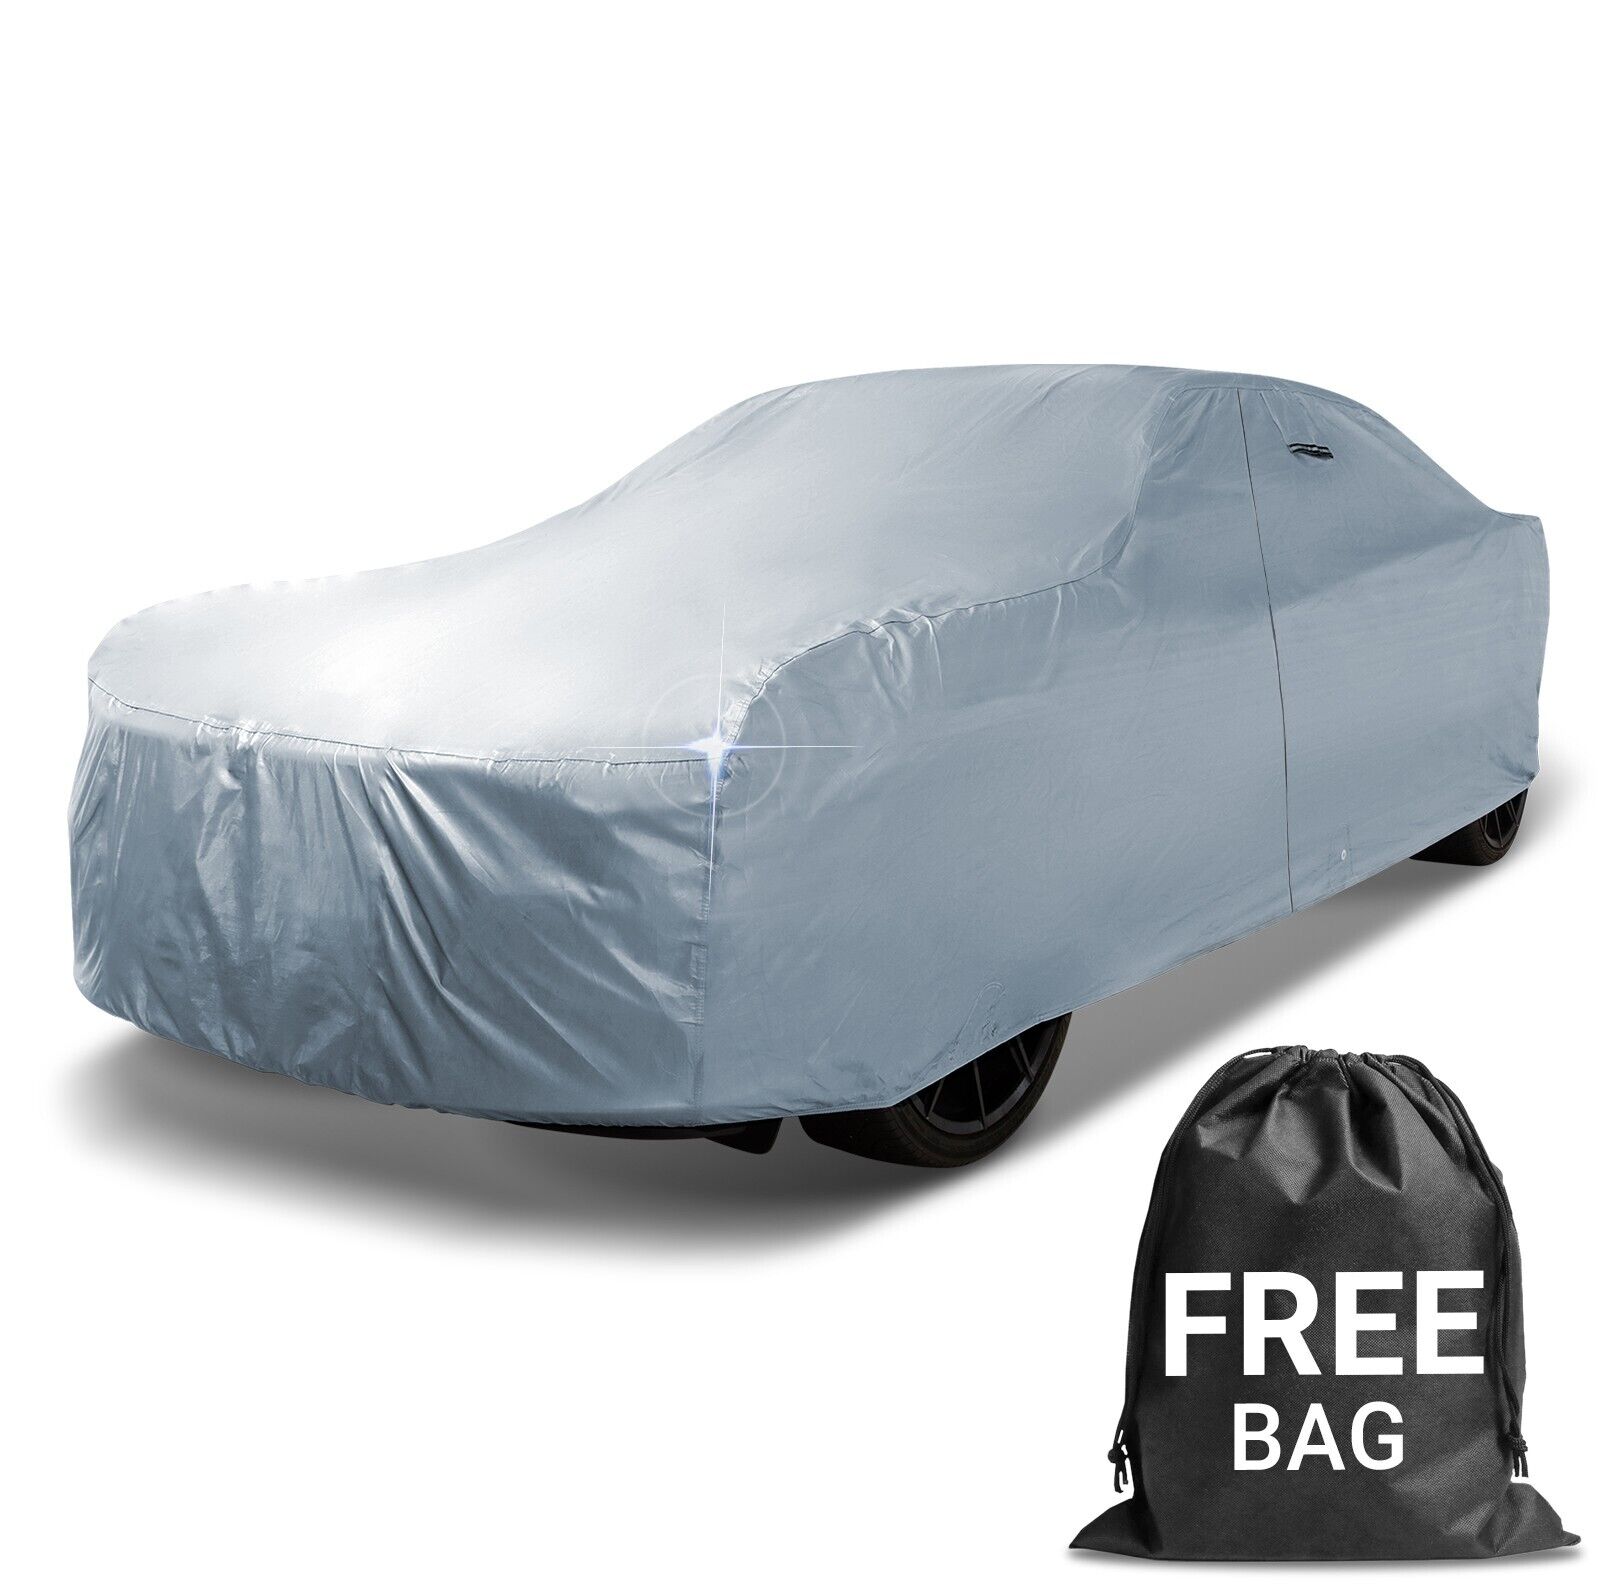 1965-1976 Cadillac Calais Custom Car Cover - All-Weather Waterproof Protection